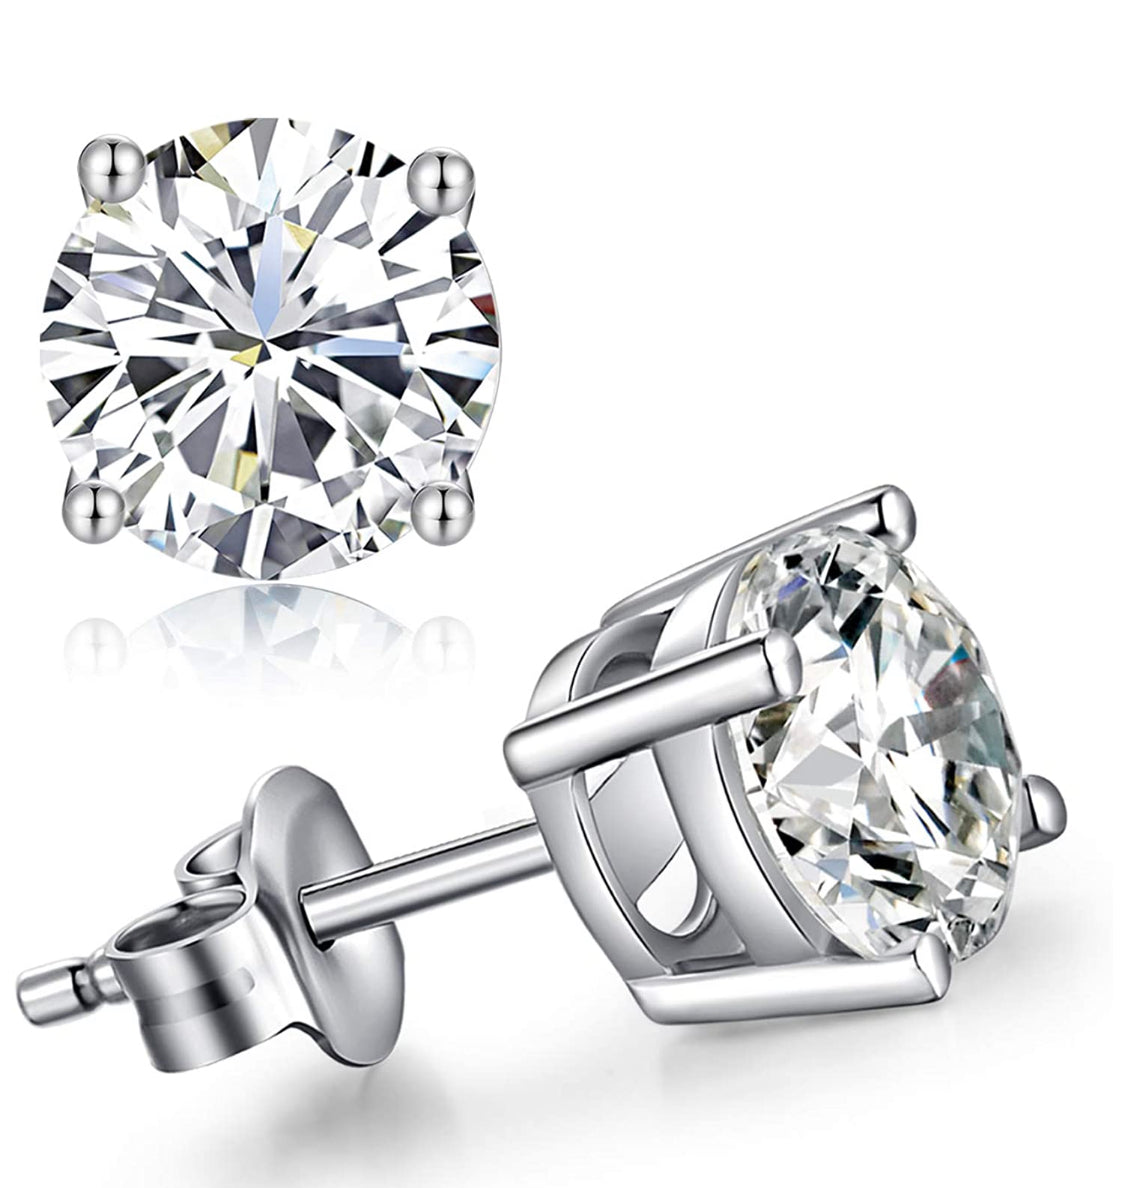 1.50ct total weight round brilliant cut diamond earrings set in 14k white gold SI-VS clarity F-G color